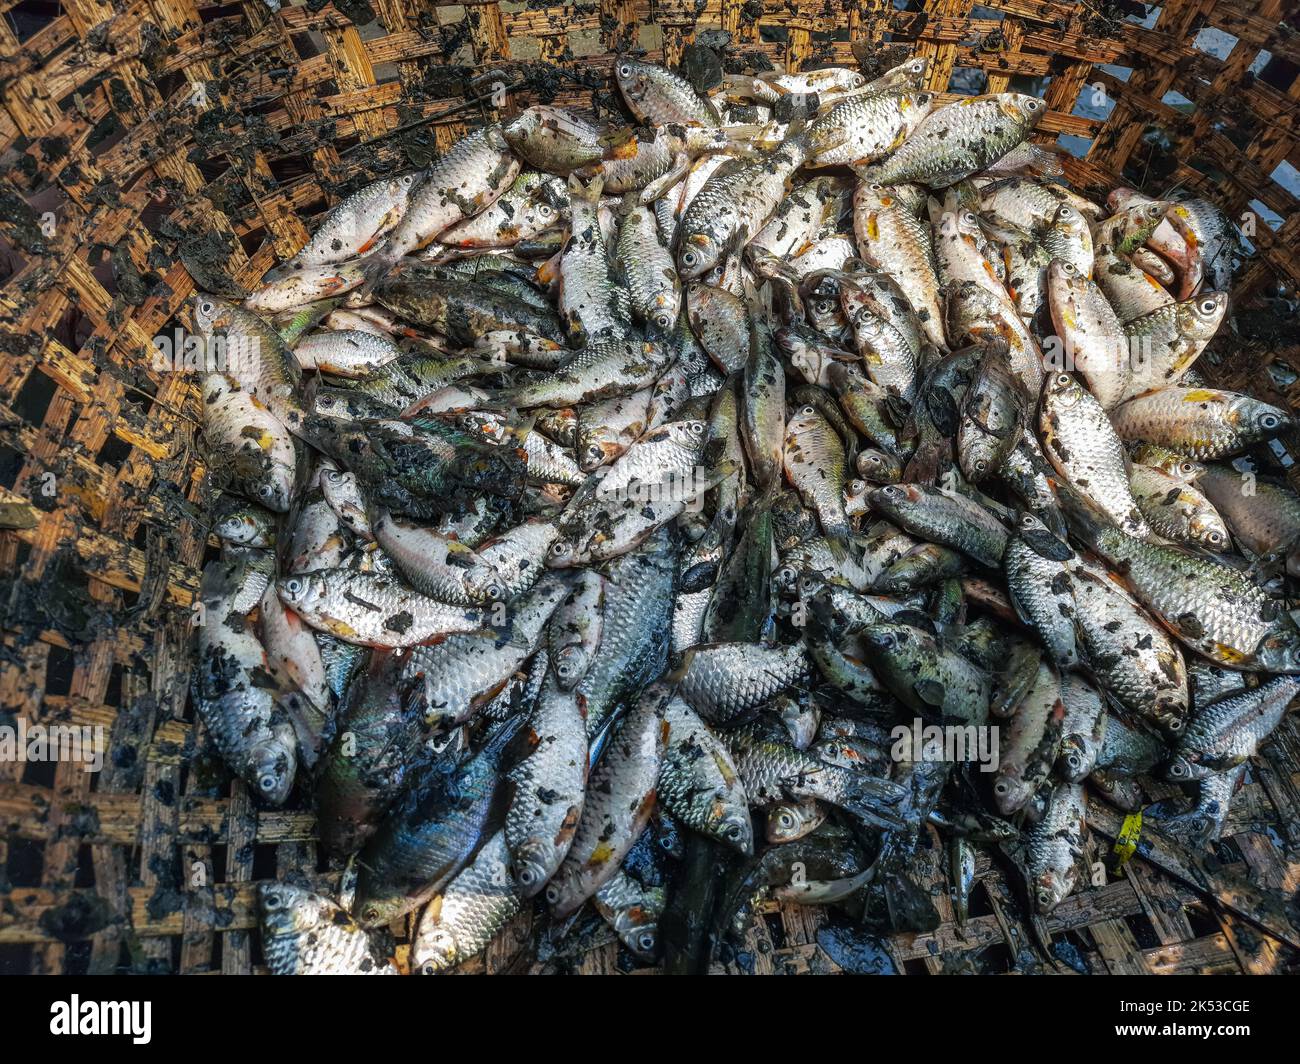 Pile of small puntius barb fish for sale in Indian fish market barb fish culture and harvesting. Puntius for sale in the local market shops for customers. Stock Photo